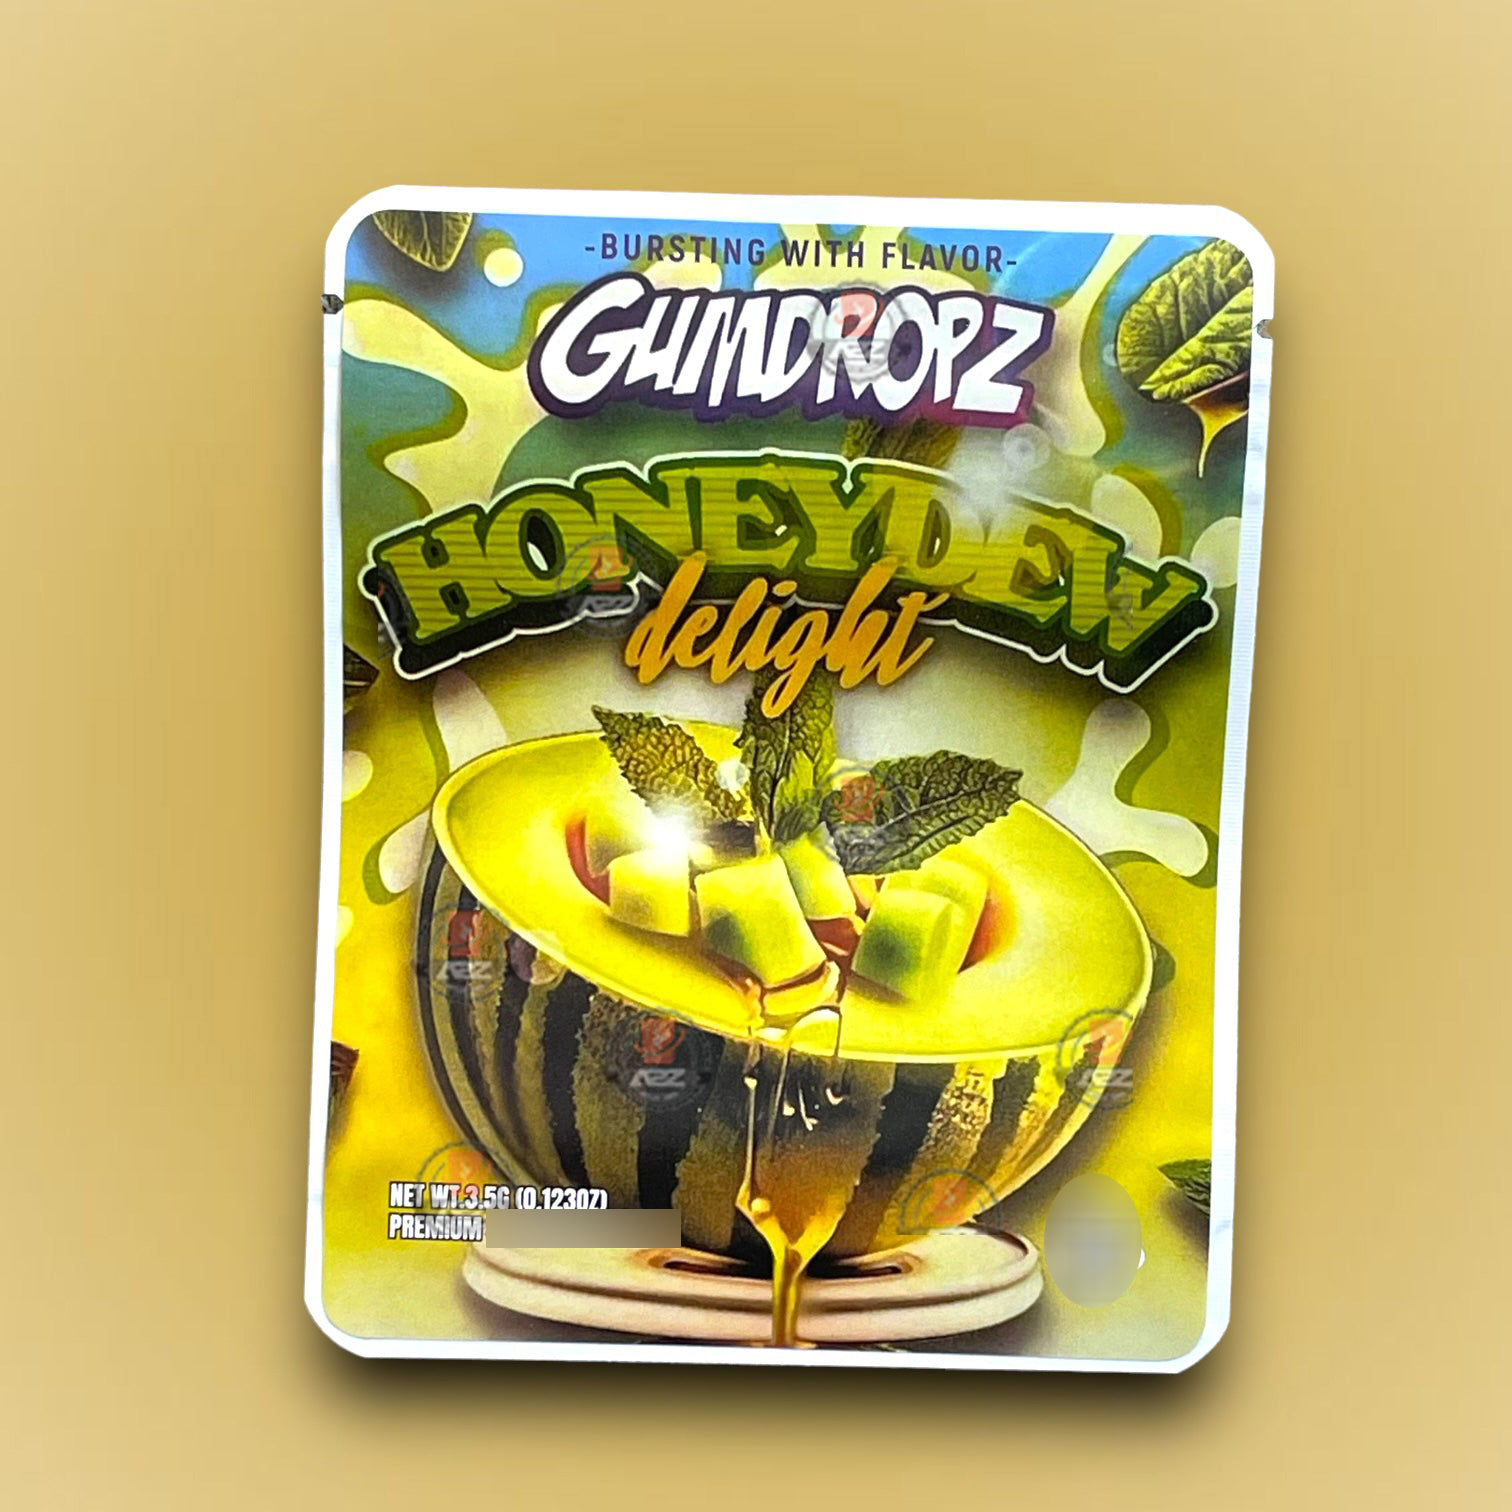 Sprinklez Gumdropz Honeydew Delight 3.5G Mylar Bags -With stickers and labels